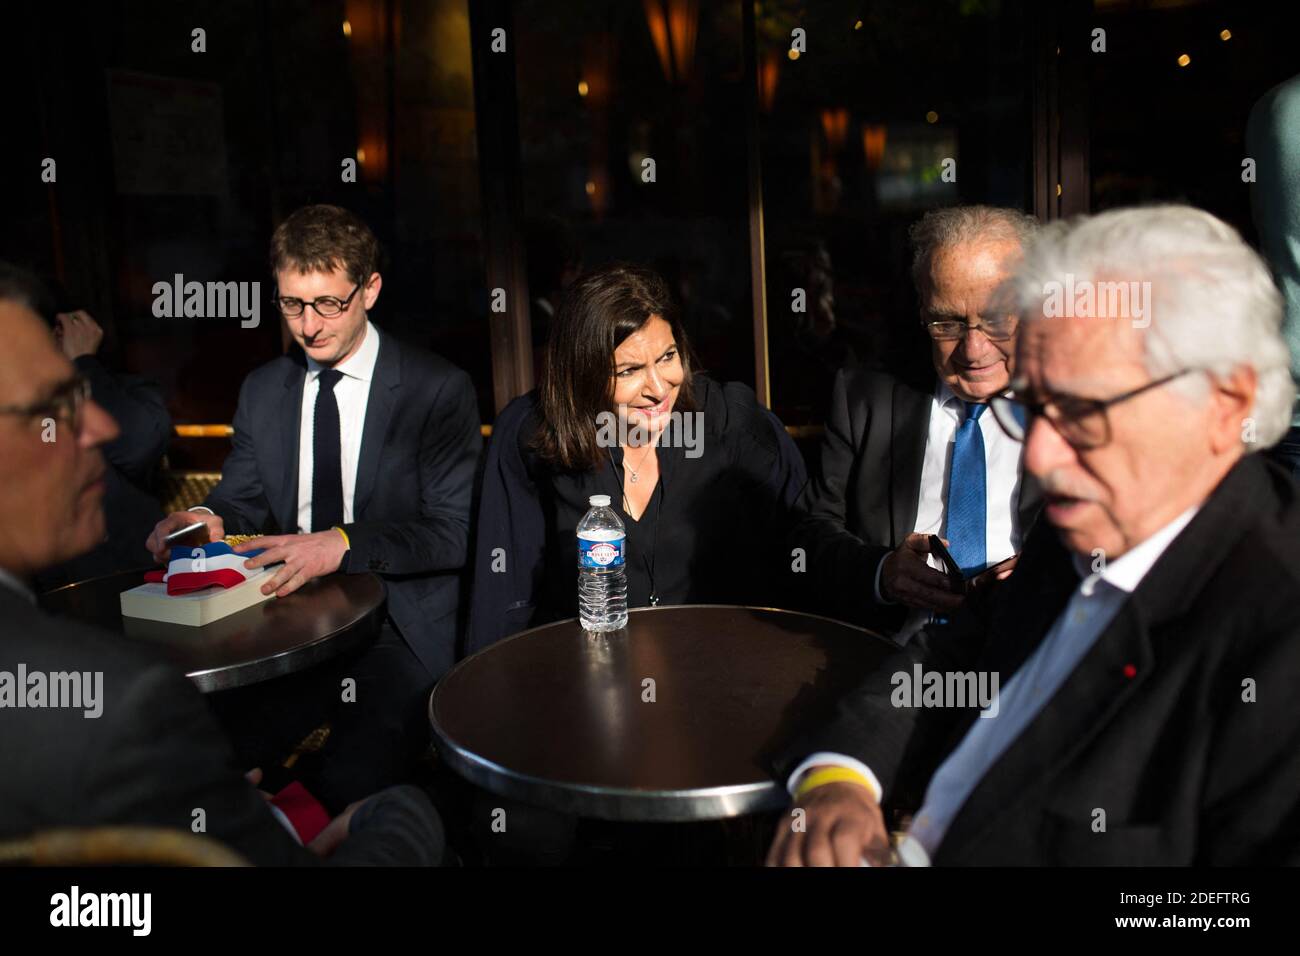 Anne Hidalgo stop to have a drink in a bar front of Notre Dame cathedral on April 18, 2019 in Paris. France paid a daylong tribute on April 18, 2019 to the Paris firefighters who saved Notre Dame Cathedral from collapse, while construction workers rushed to secure an area above one of the church's famed rose-shaped windows and other vulnerable sections of the fire-damaged landmark. Photo by Raphael Lafargue/ABACAPRESS.COM Stock Photo